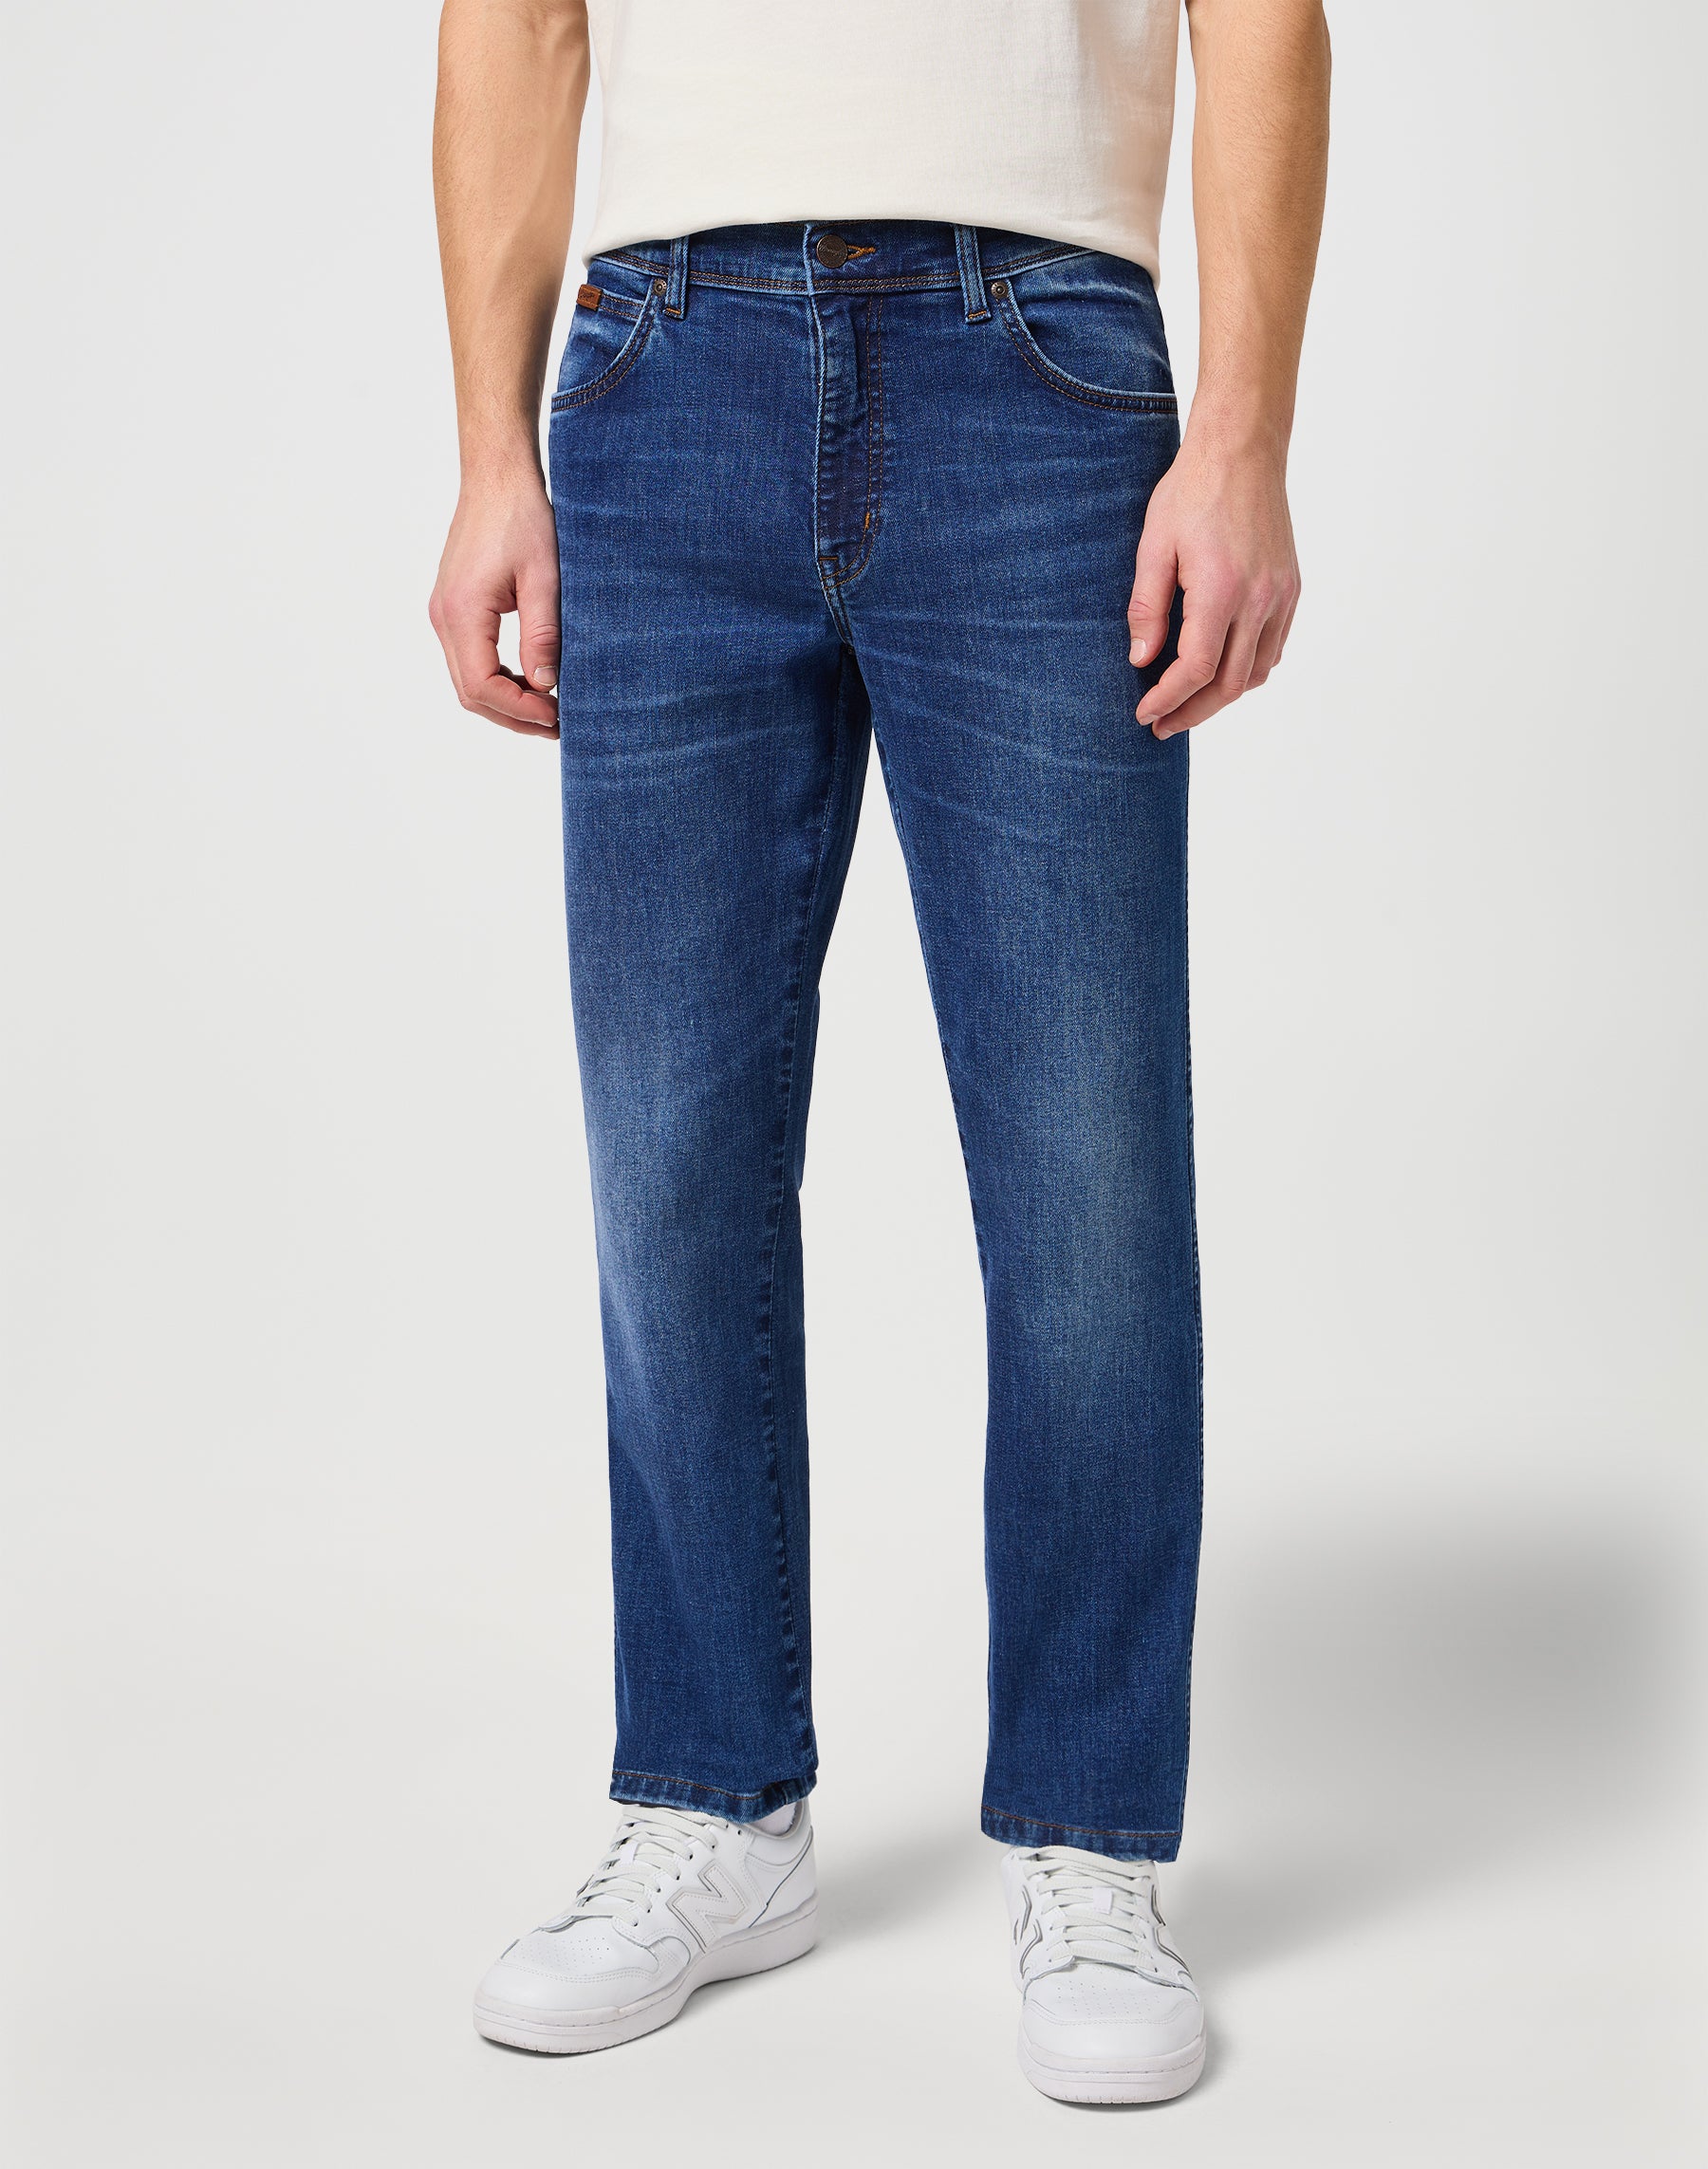 Texas Low Stretch in Dean Jeans Wrangler   